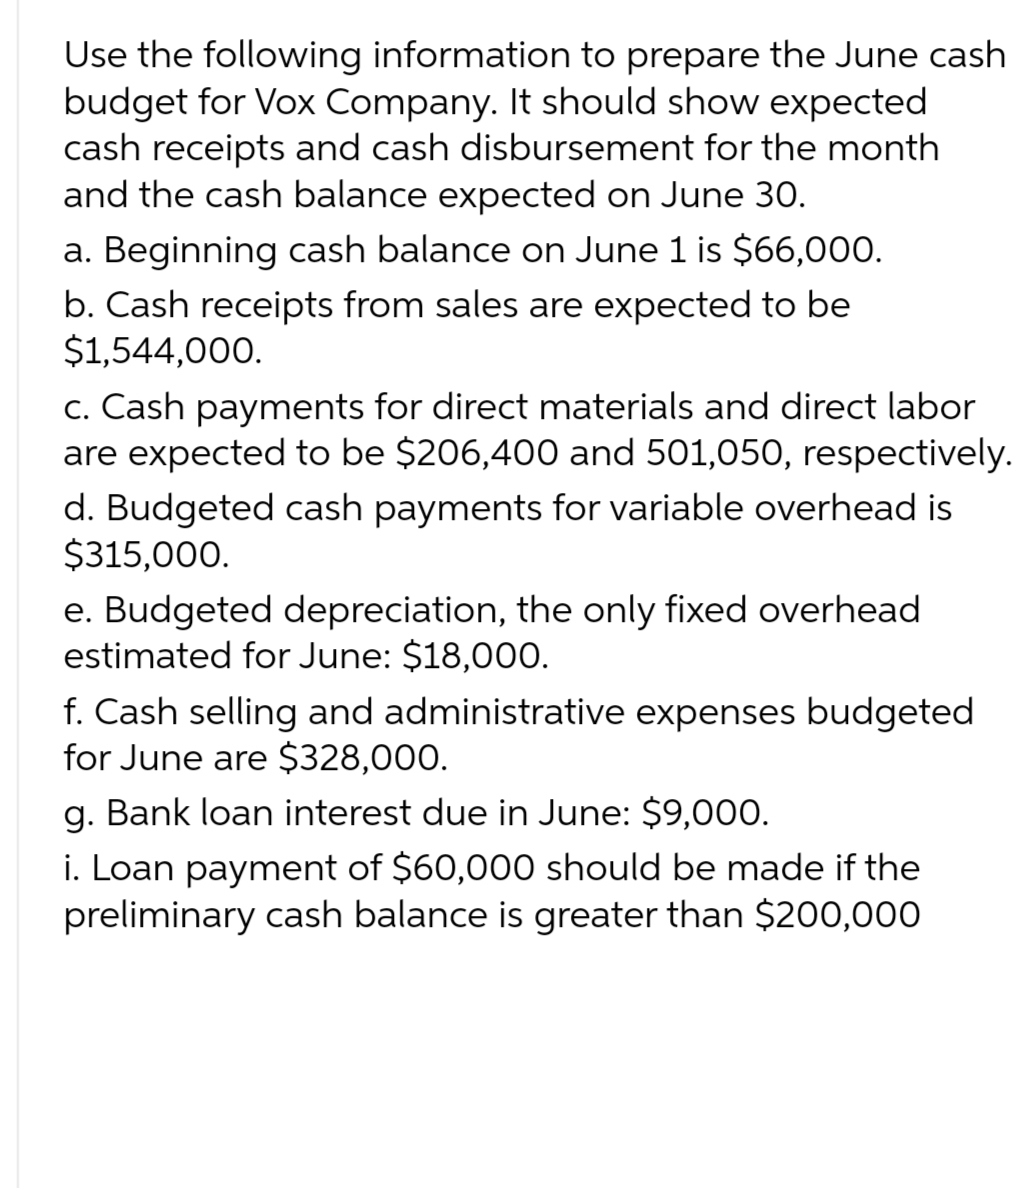 Use the following information to prepare the June cash
budget for Vox Company. It should show expected
cash receipts and cash disbursement for the month
and the cash balance expected on June 30.
a. Beginning cash balance on June 1 is $66,000.
b. Cash receipts from sales are expected to be
$1,544,000.
c. Cash payments for direct materials and direct labor
are expected to be $206,400 and 501,050, respectively.
d. Budgeted cash payments for variable overhead is
$315,000.
e. Budgeted depreciation, the only fixed overhead
estimated for June: $18,000.
f. Cash selling and administrative expenses budgeted
for June are $328,000.
g. Bank loan interest due in June: $9,000.
i. Loan payment of $60,000 should be made if the
preliminary cash balance is greater than $200,000